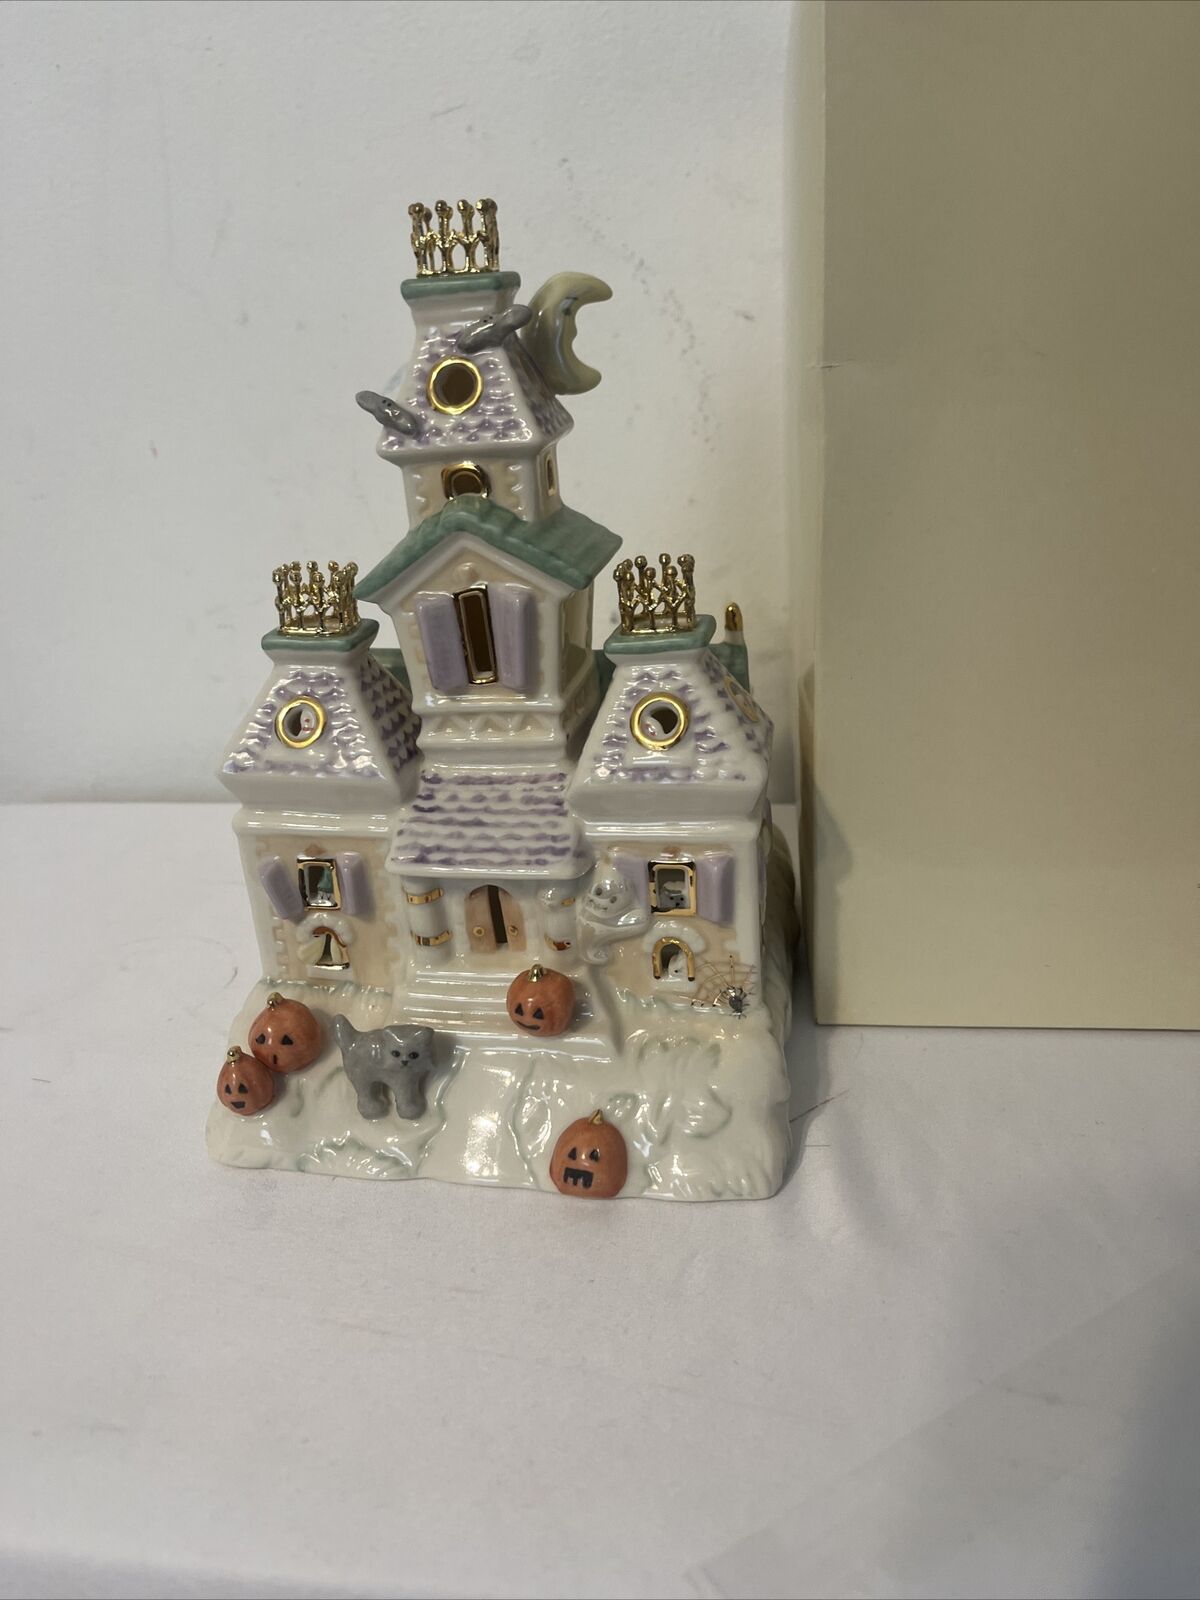 LENOX The HAUNTED HOUSE Votive HALLOWEEN Sculpture from 2002